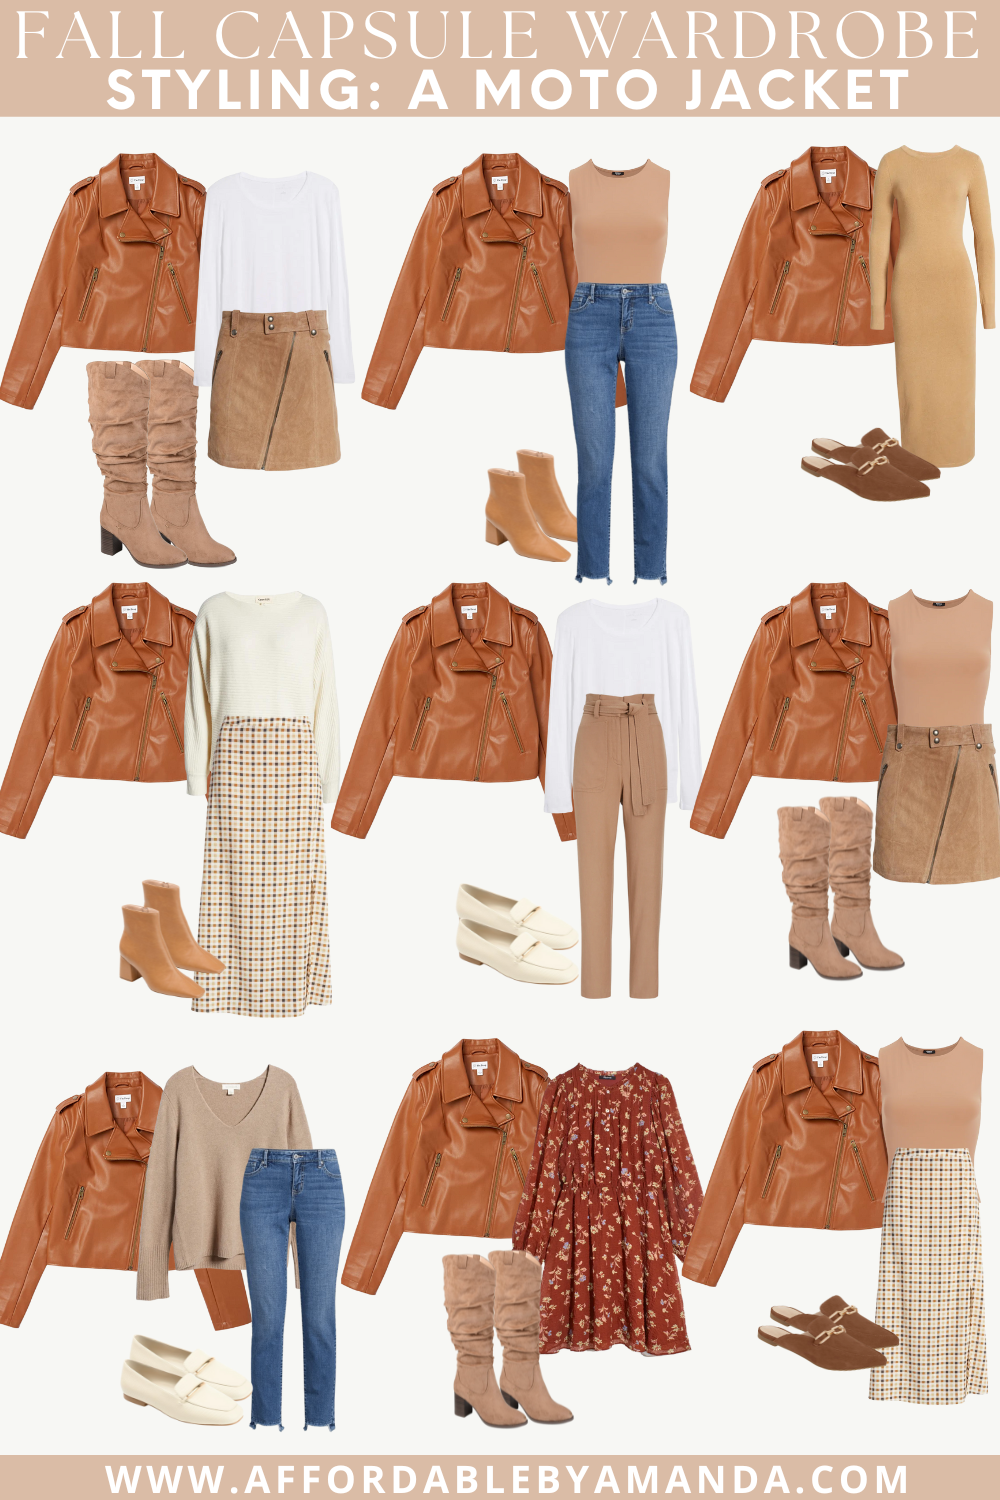 Capsule Wardrobe For Fall 2022 - How to Style a Faux Leather Moto Jacket for Fall 2022